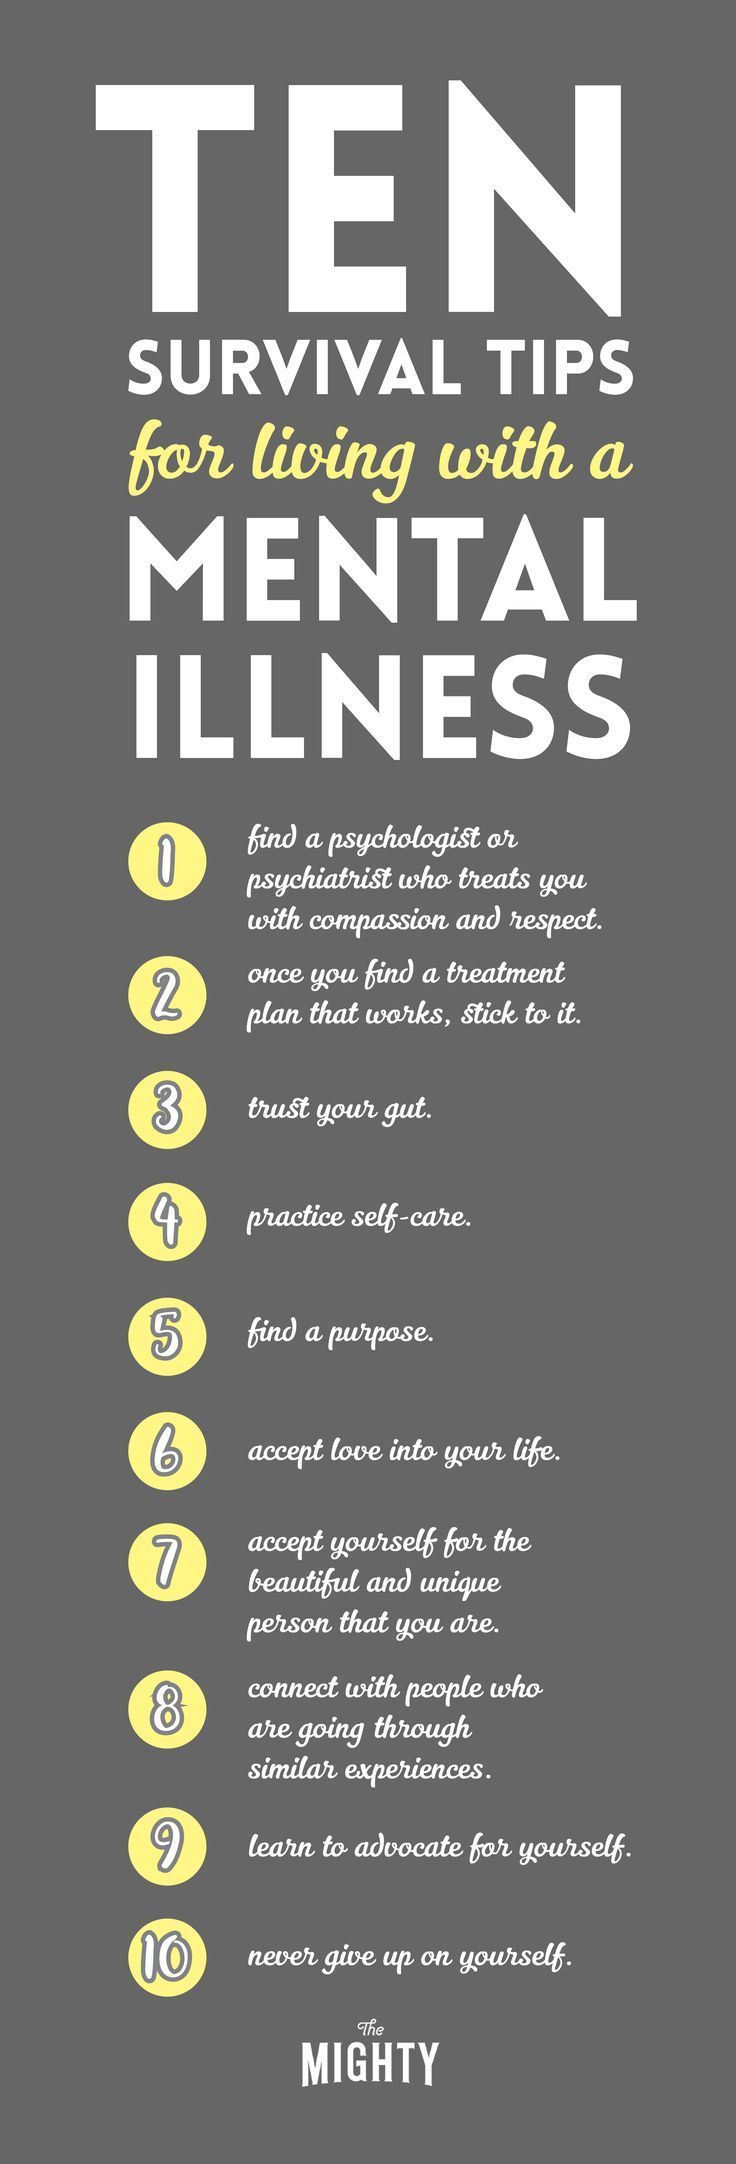 Psychology-Infographic-10-Survival-Tips-For-Living-With-a-Mental-Illness.-mentalhealth-mentalhealthaw Psychology Infographic : 10 Survival Tips For Living With a Mental Illness. #mentalhealth #mentalhealthaw...